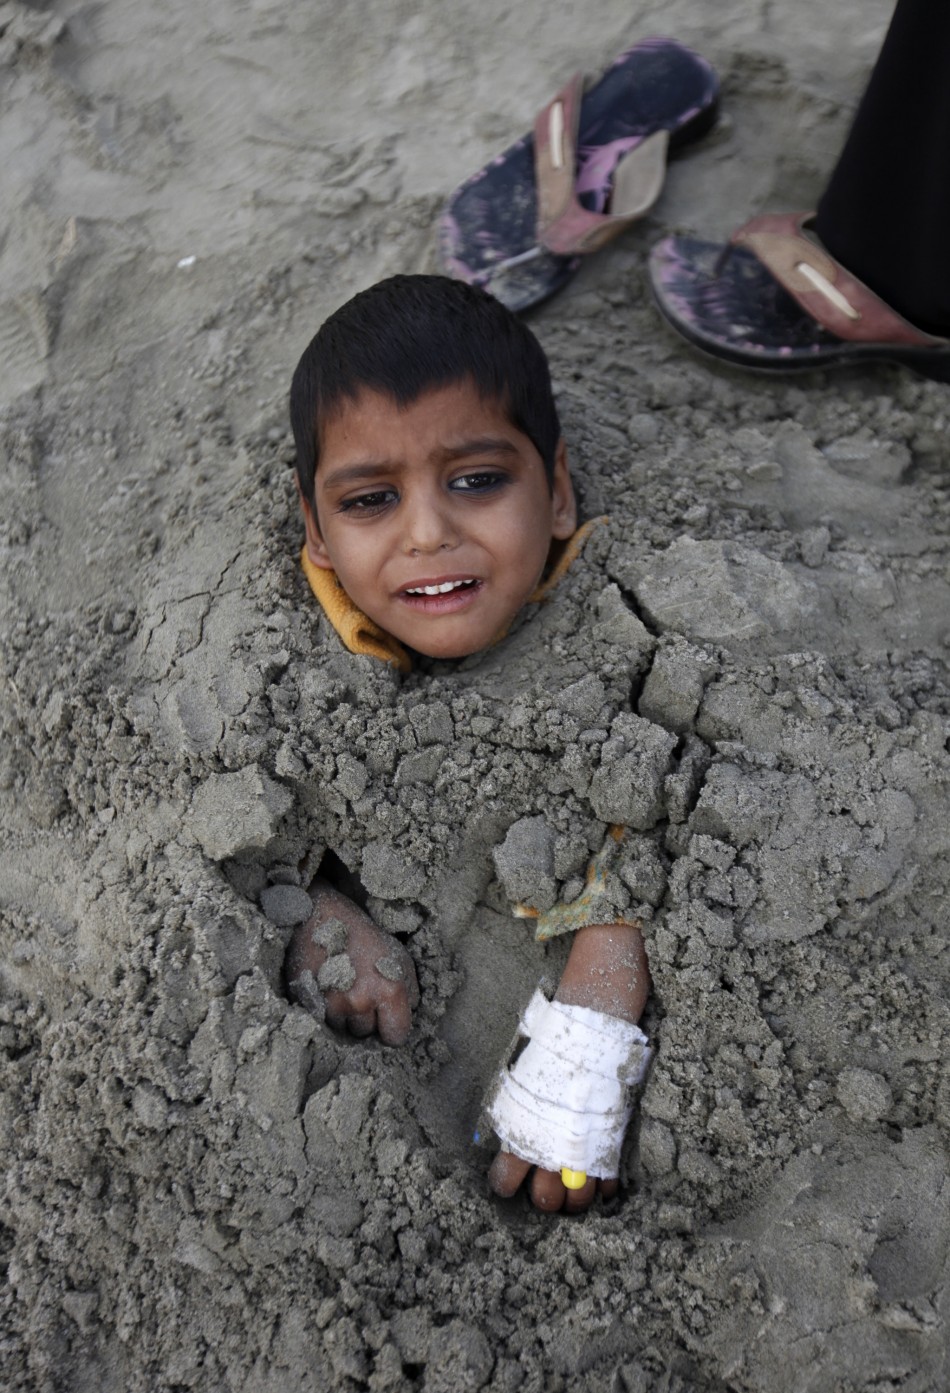 Yasir, a seven-year-old handicapped boy, lies buried in sand up to his neck during a partial solar eclipse at Karachis Clifton beach